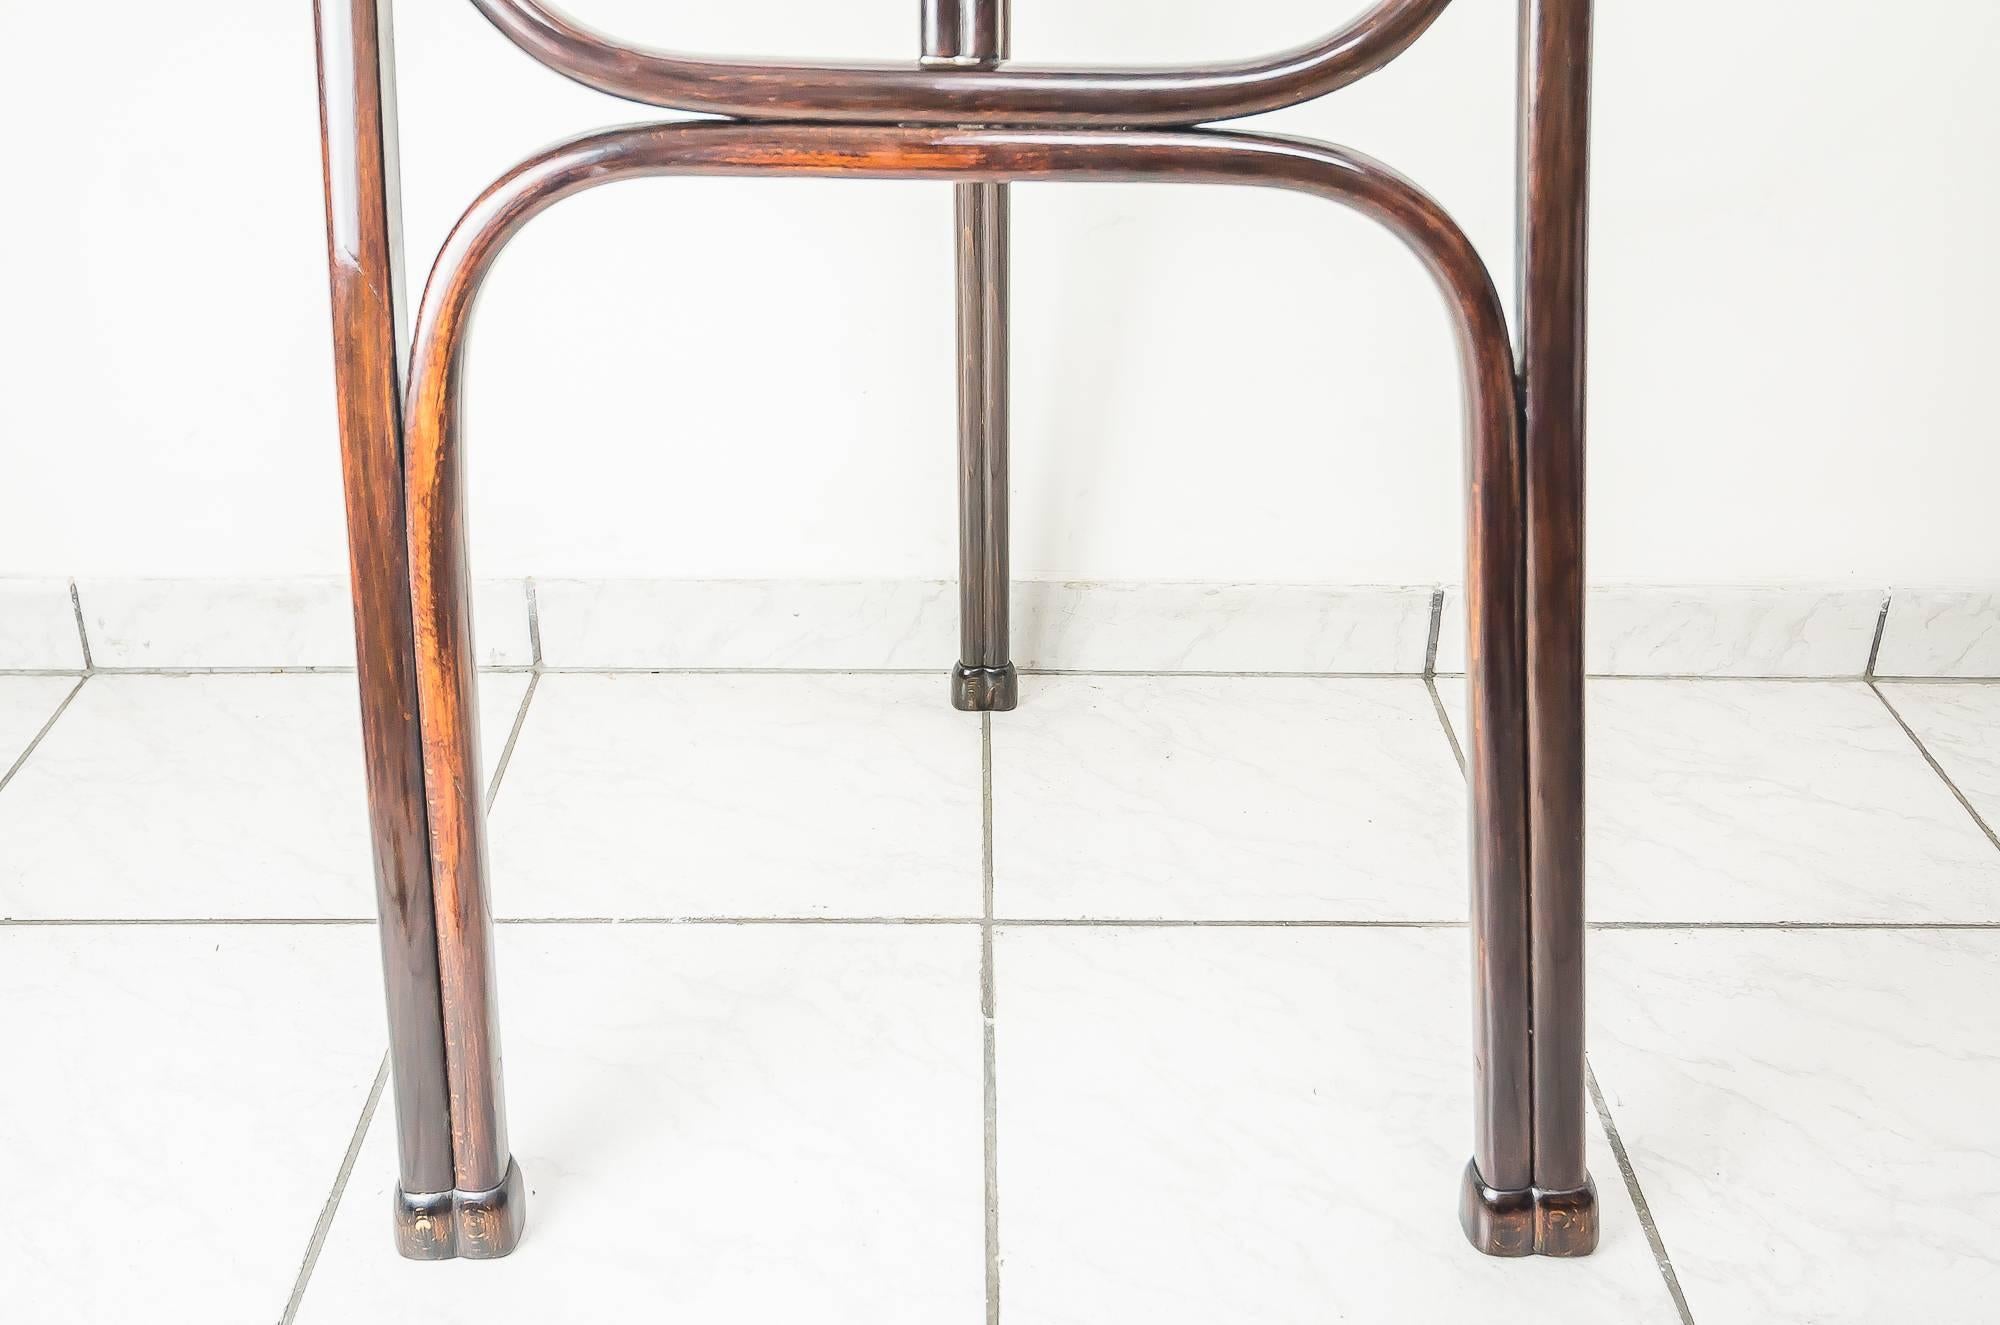 Wood Art Nouveau Easel circa 1900 Beechwood Polished 'Red / Brown' by Thonet